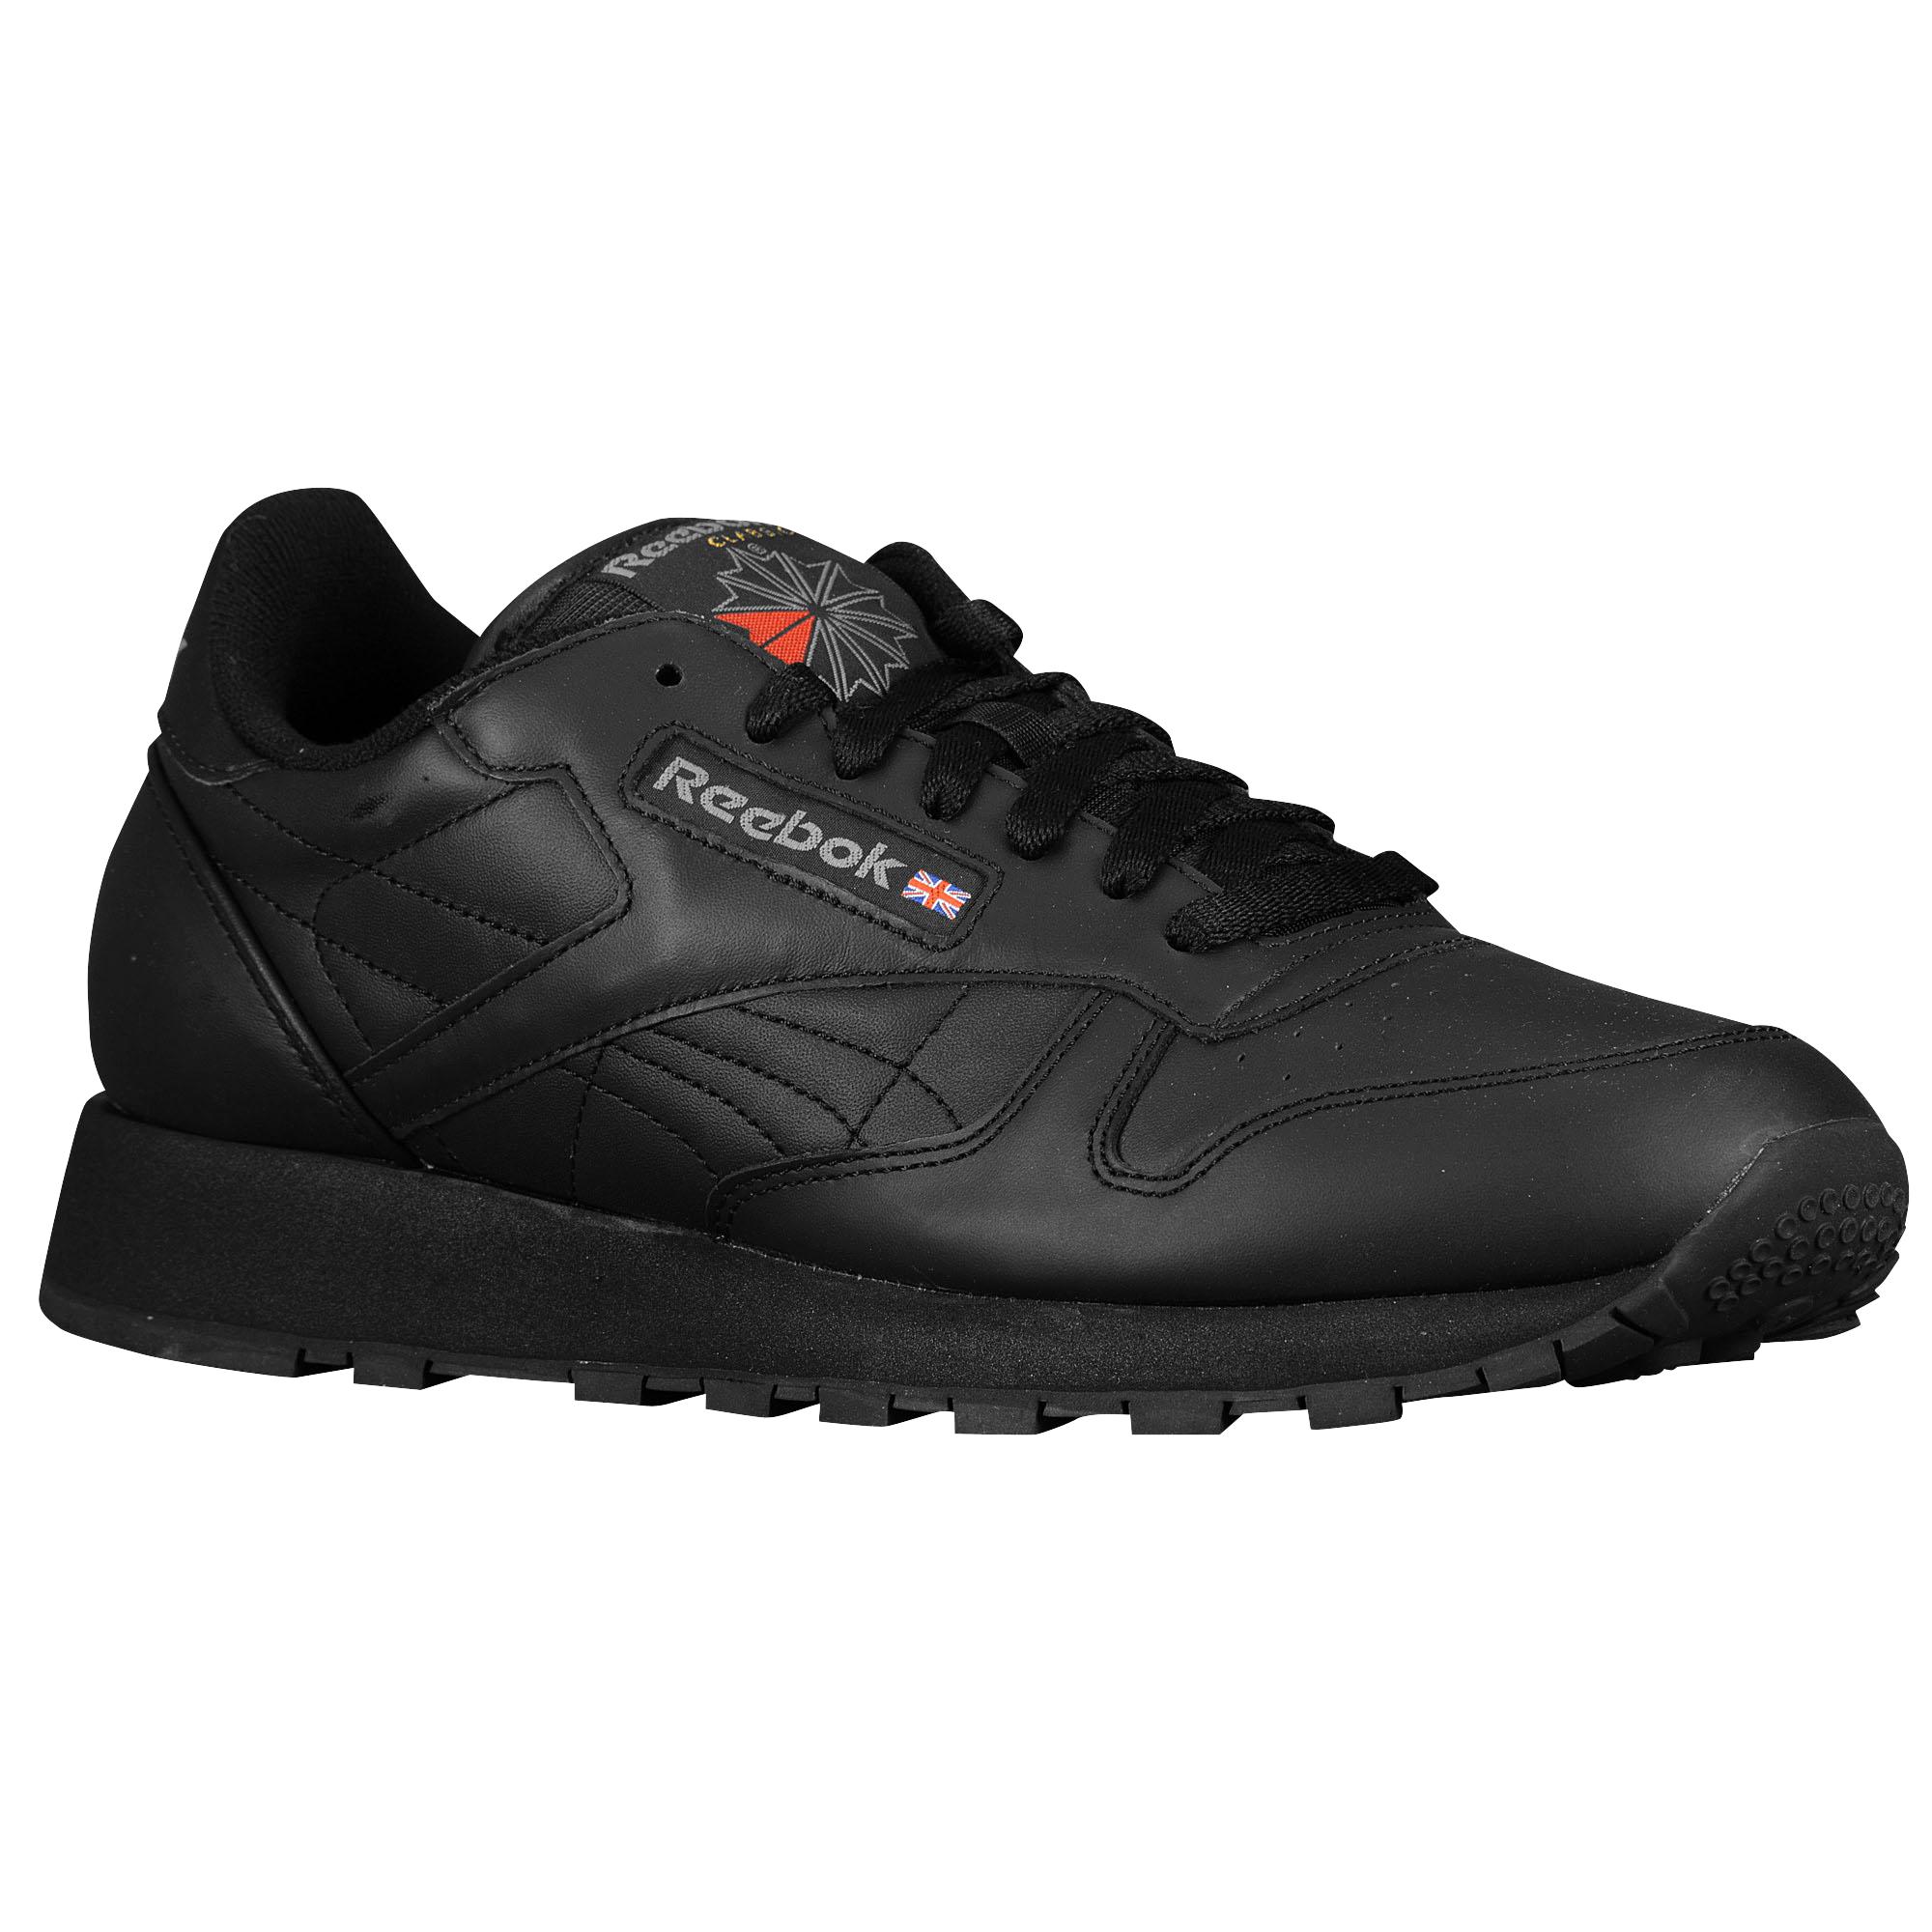 Reebok Classic Leather Running Shoes in Black for Men - Save 20% - Lyst